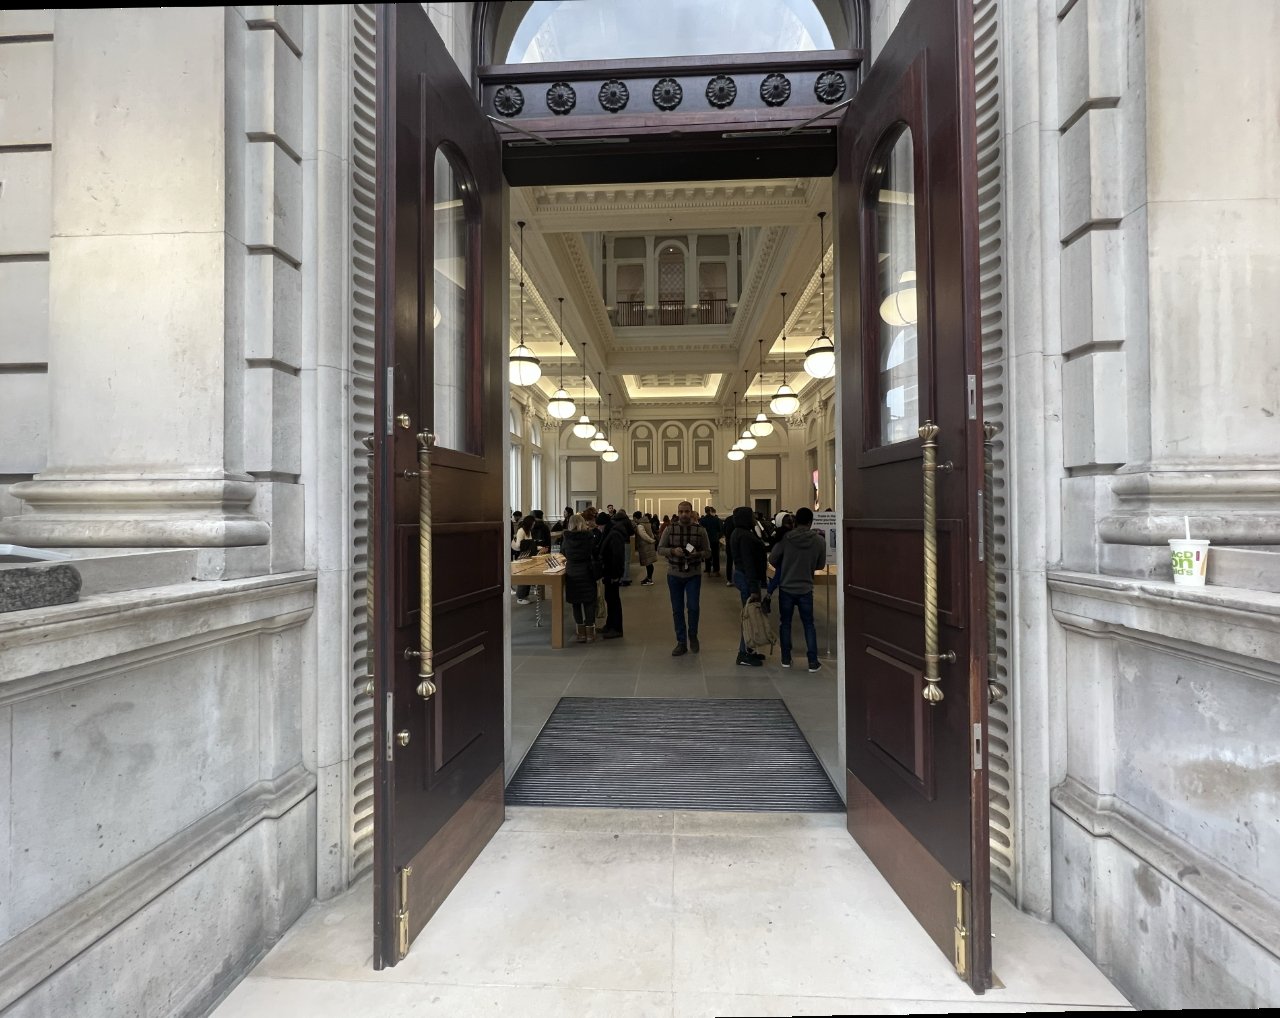 Walk through the doors of 19th century banks to the Apple Store